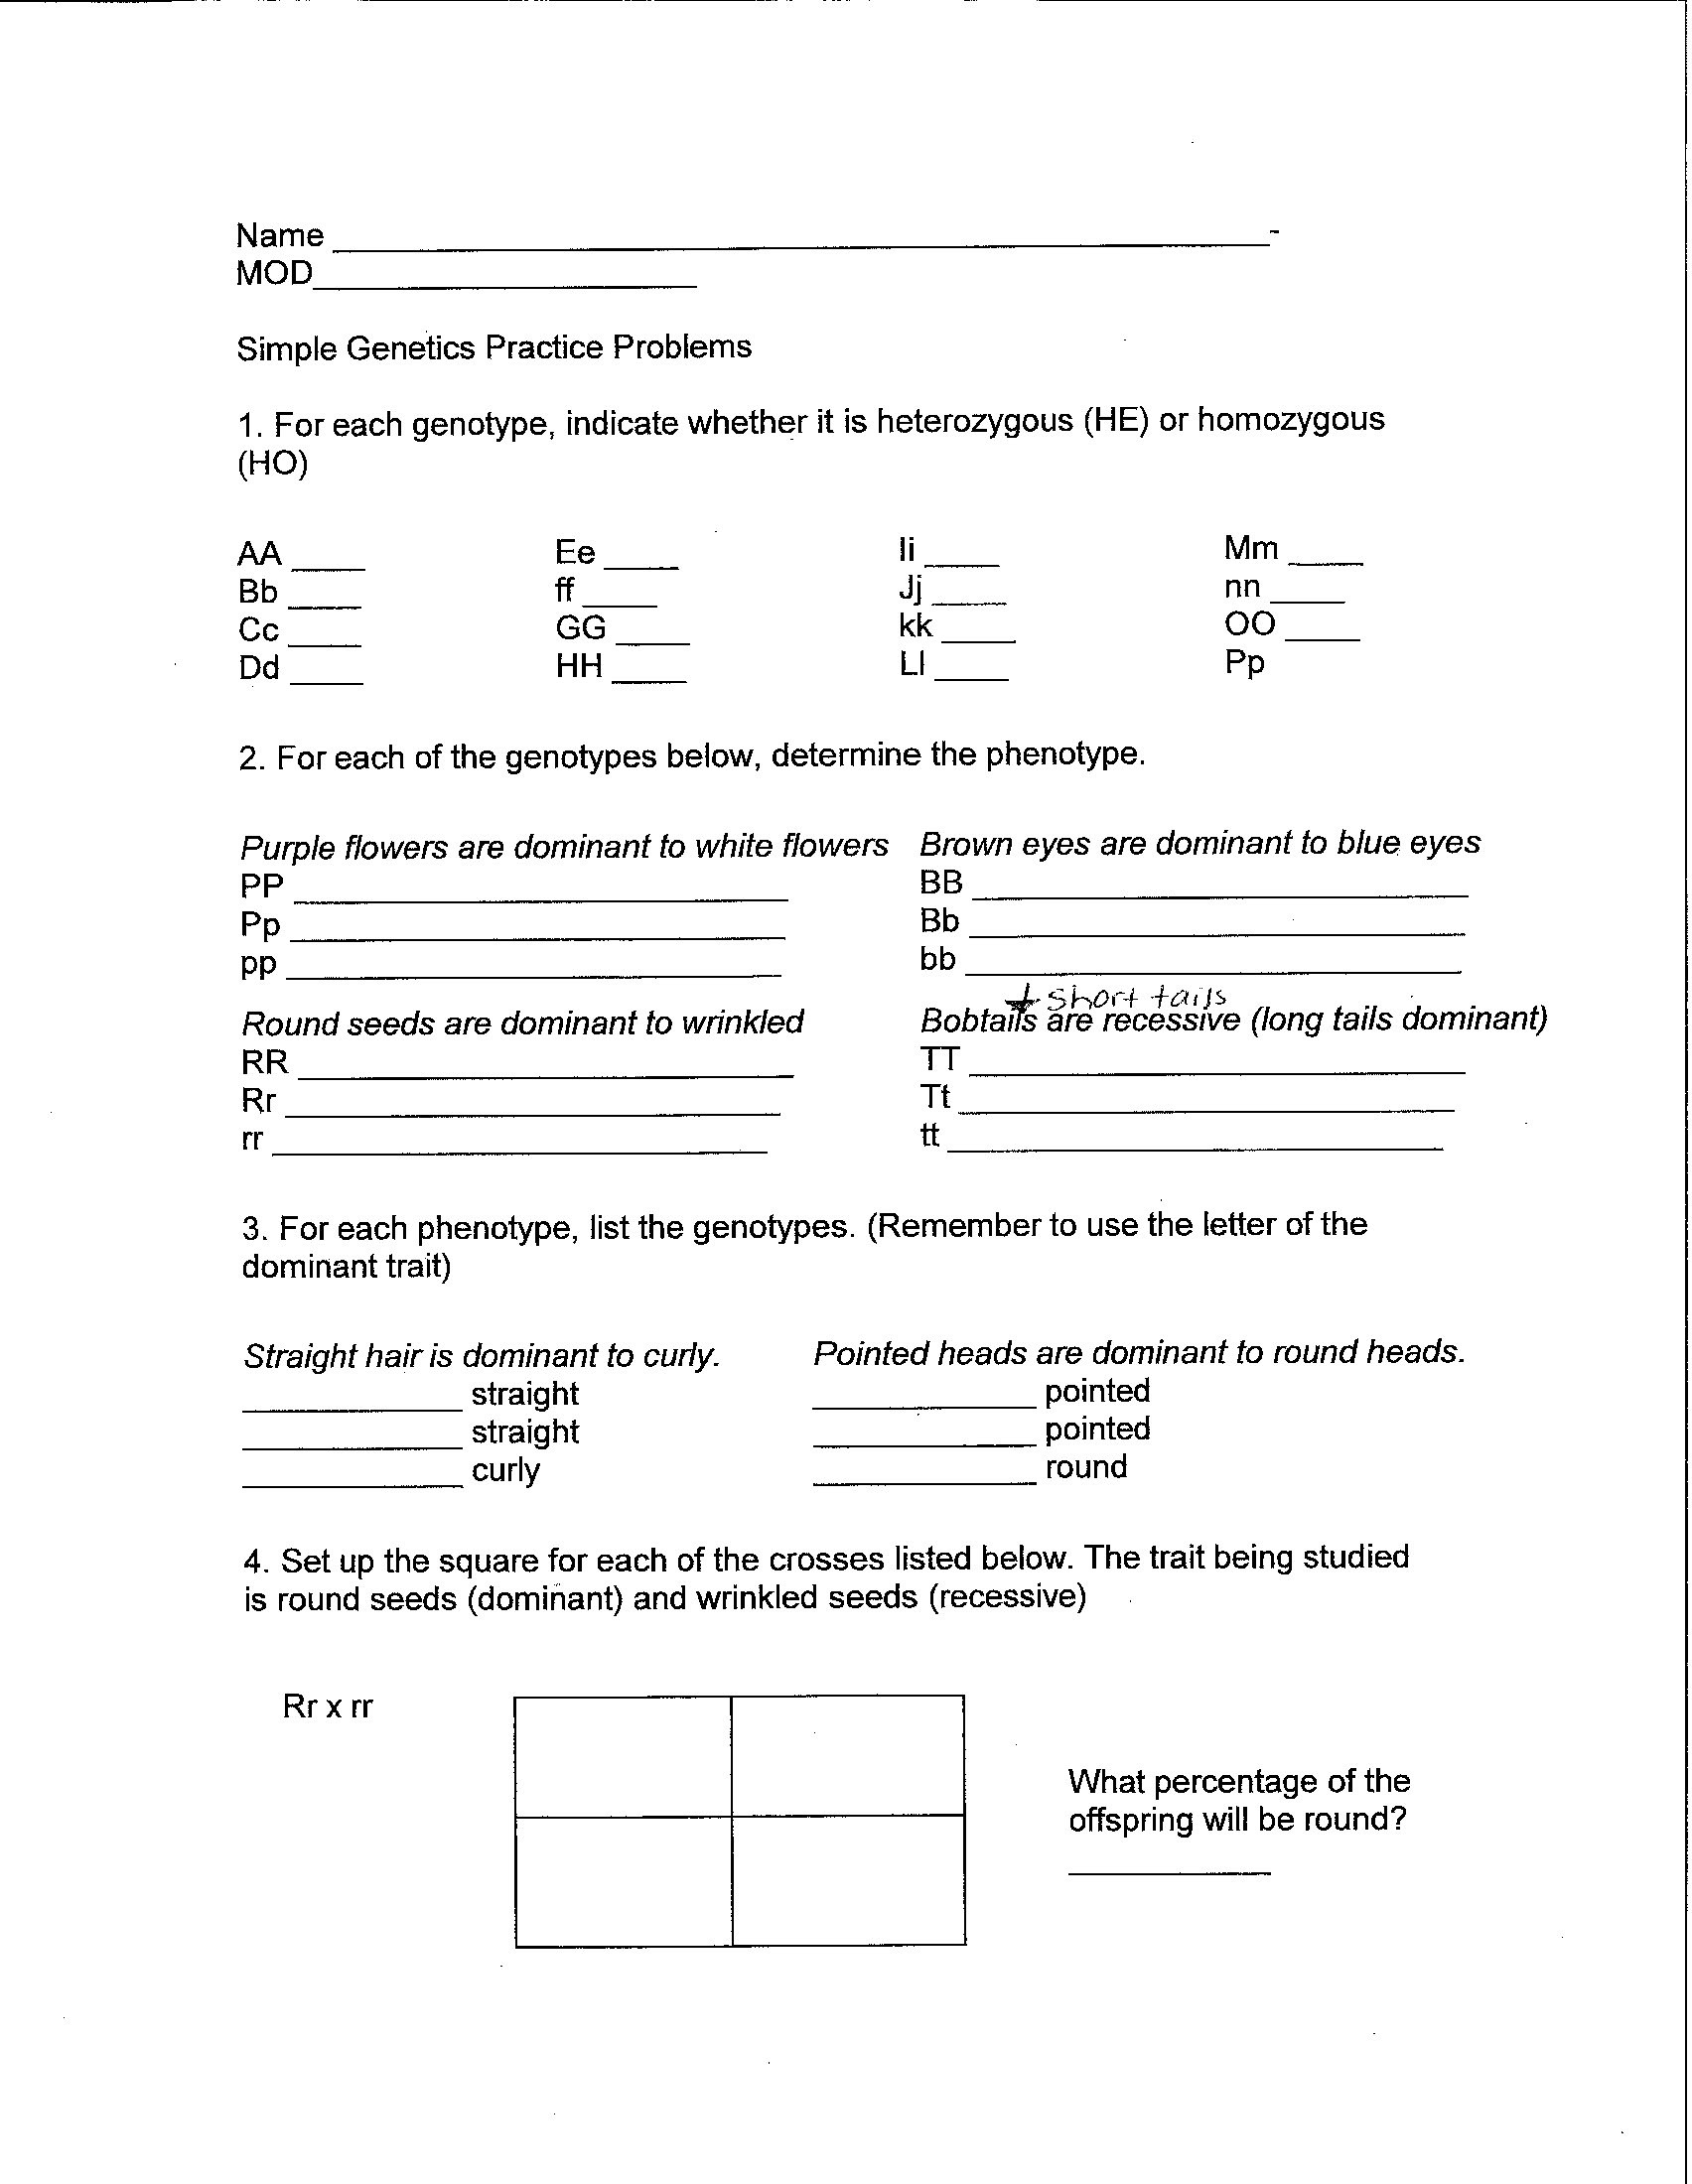 Punnett Square Practice Problems Worksheet Speeches Online to An Essay About Yourself Muslim